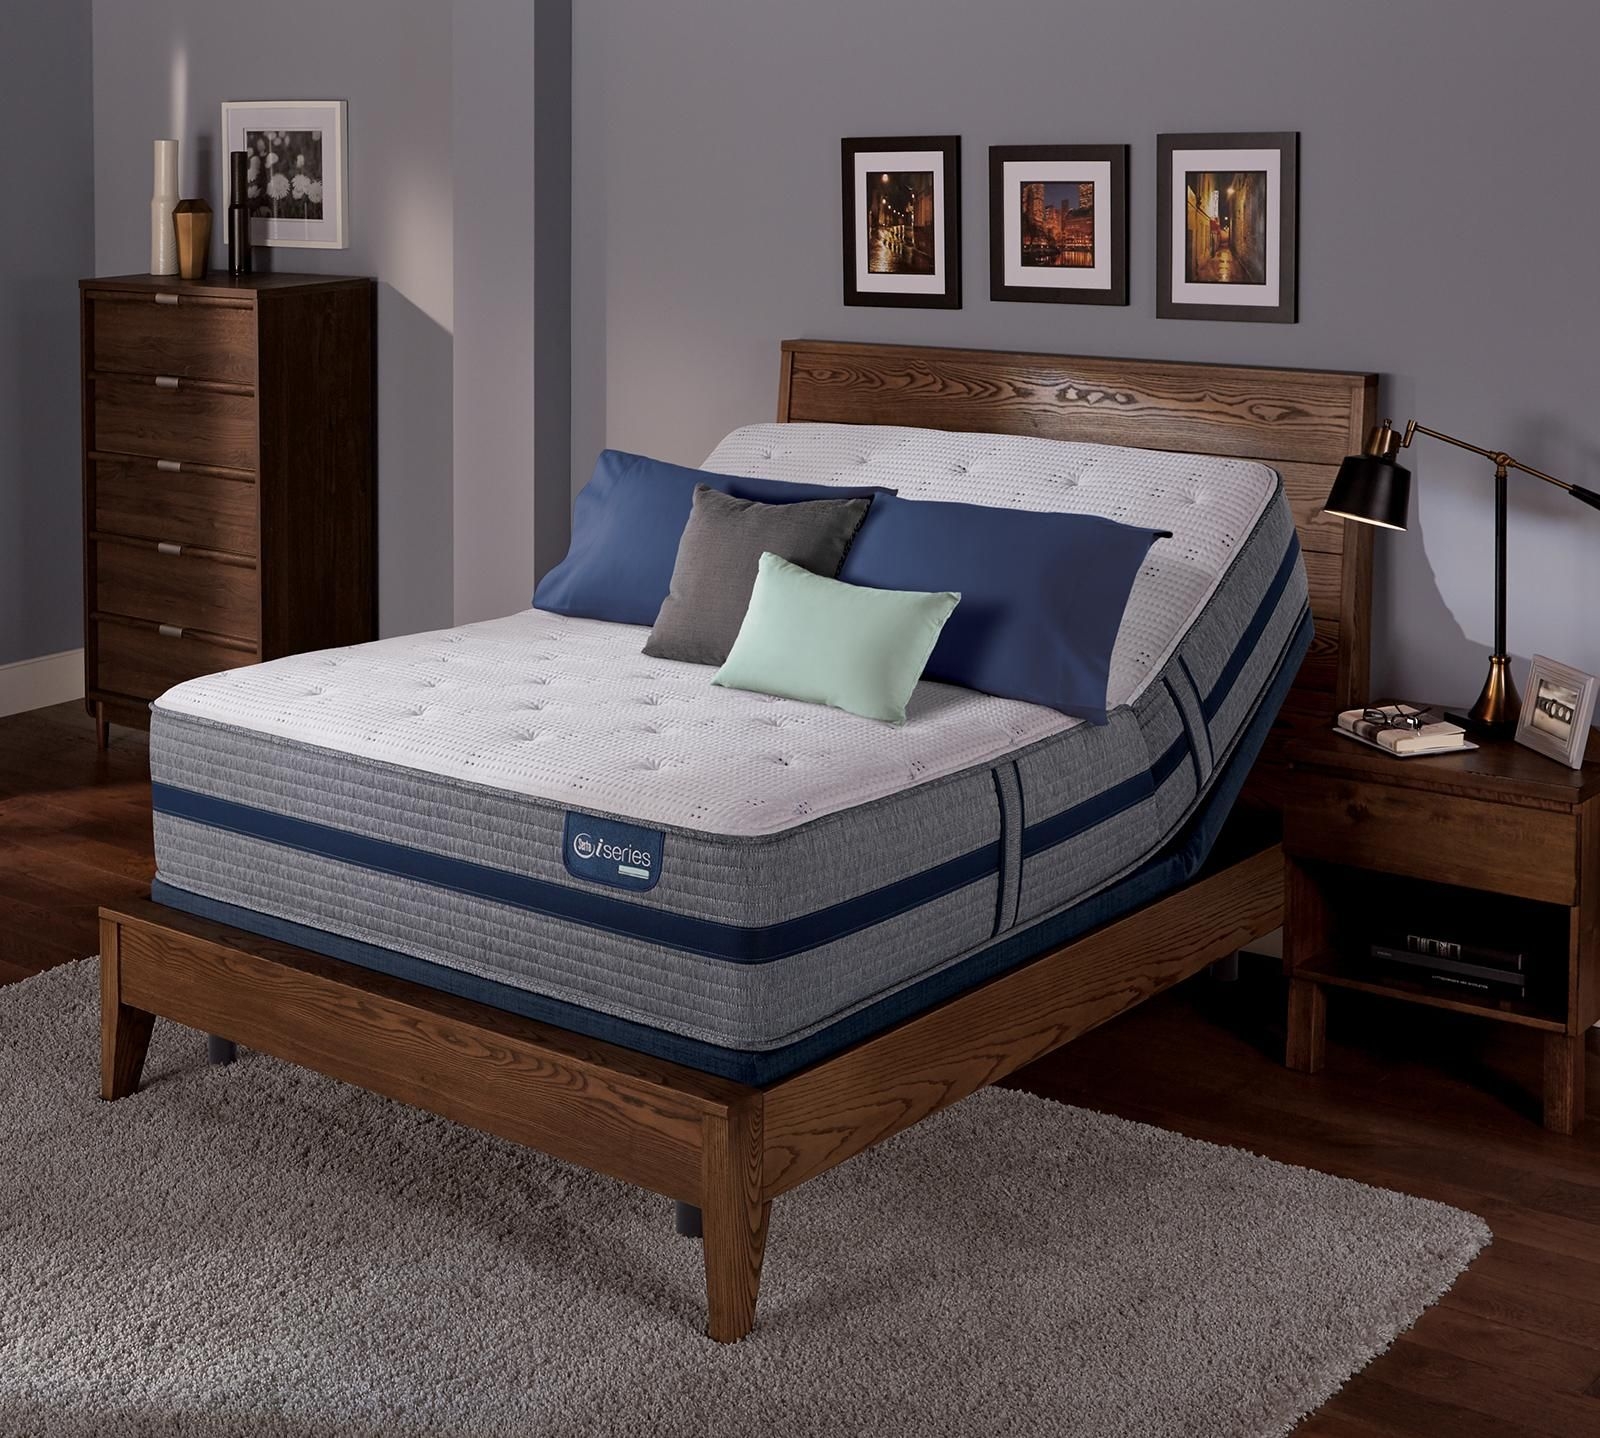 Headboards For Adjustable Beds Visualhunt, Tempur Pedic Bed Frame With Drawers